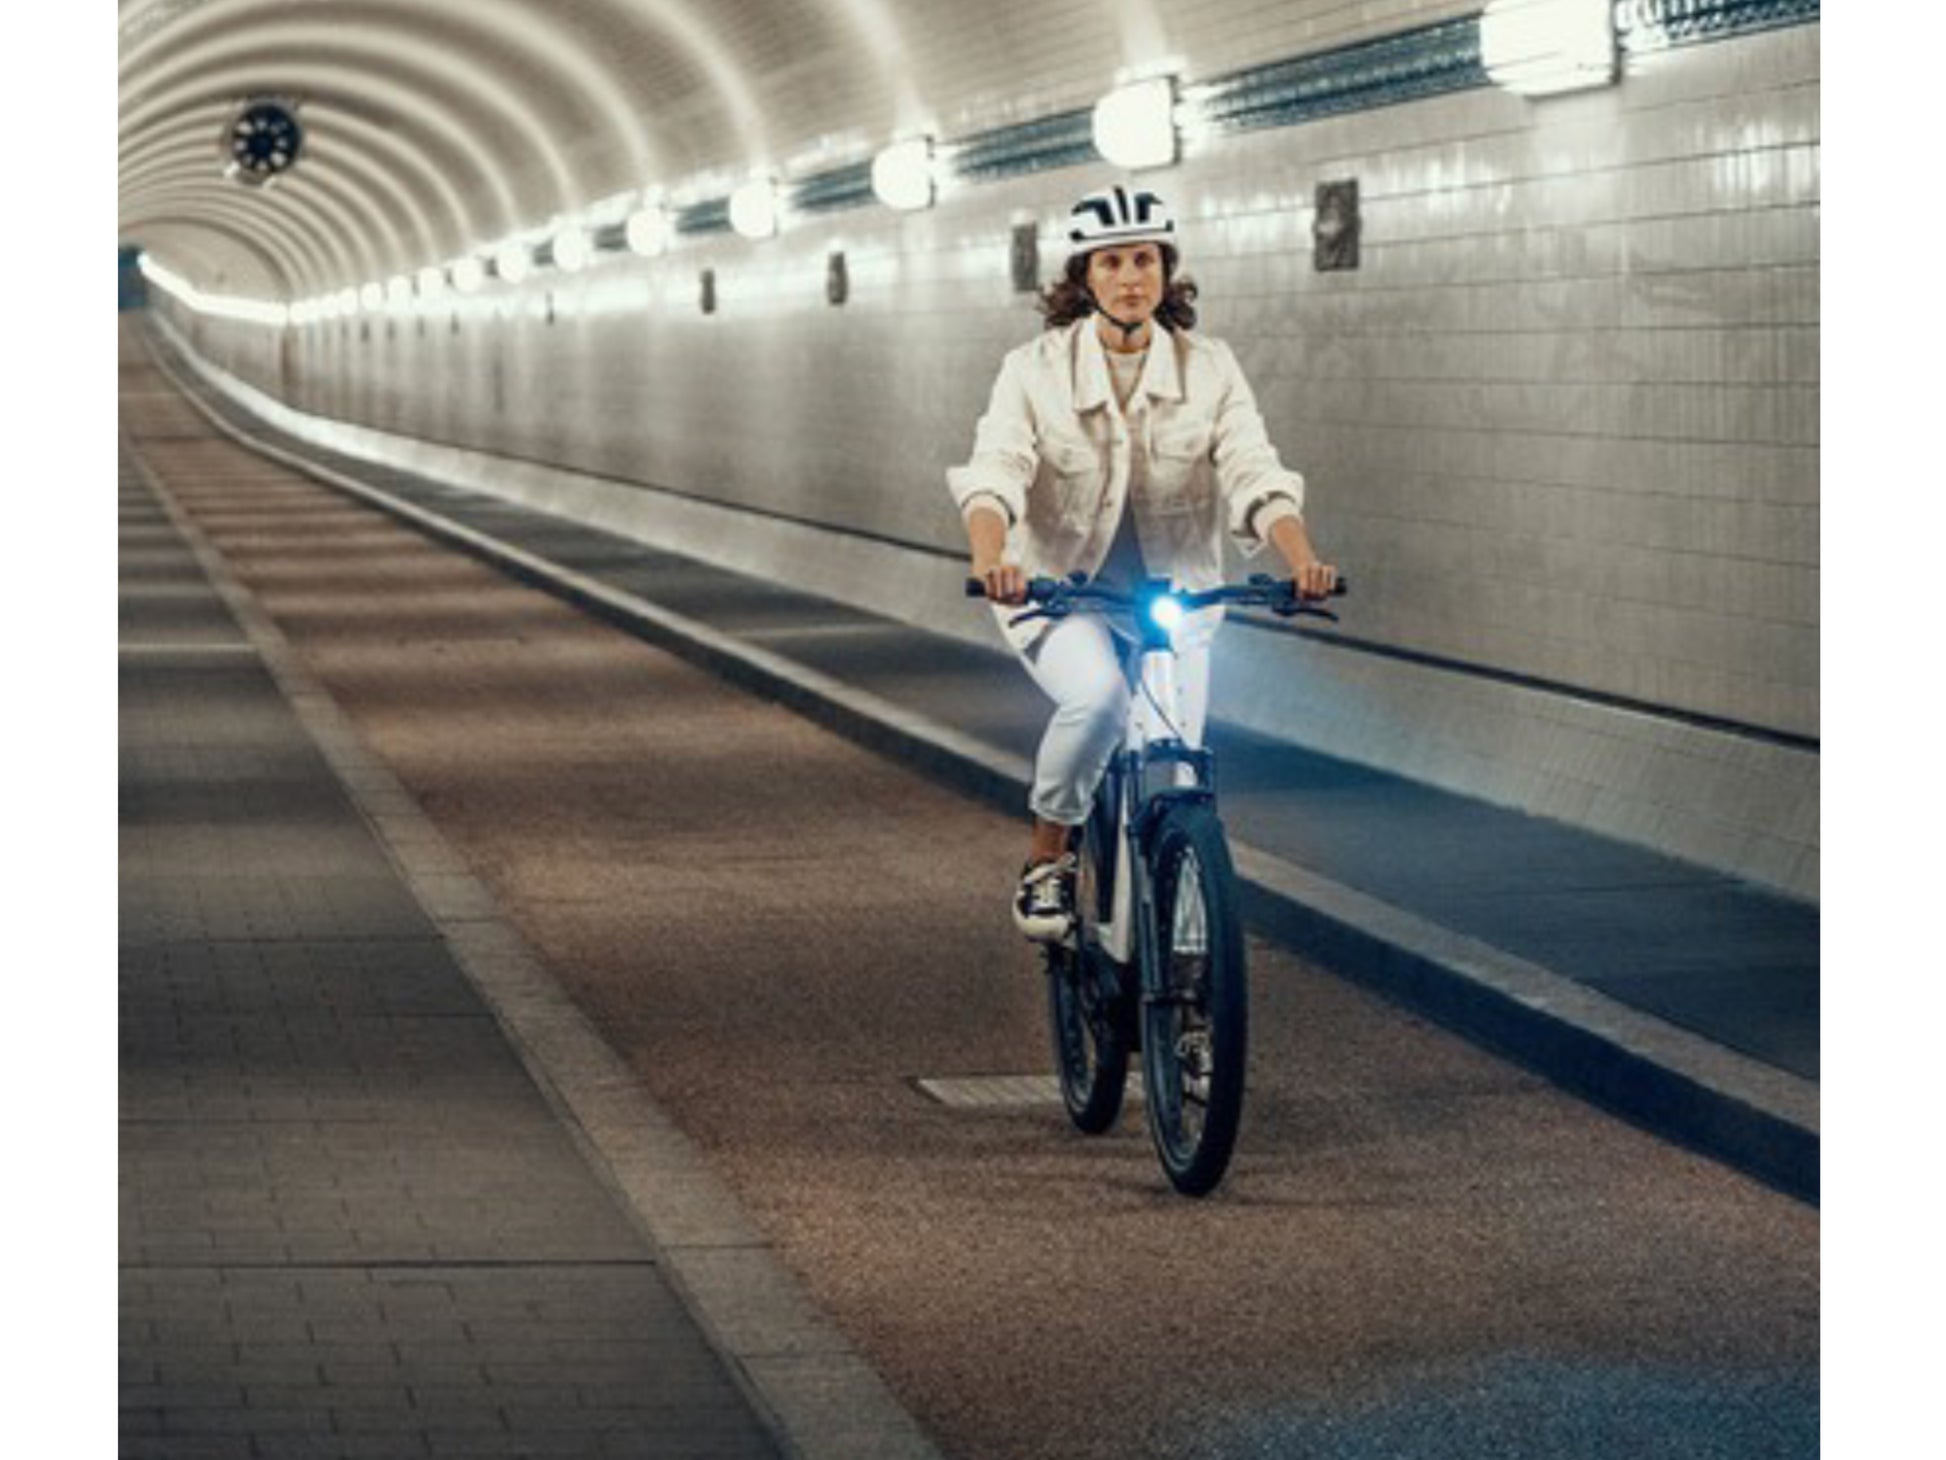 Riese and Muller Nevo GT Touring emtb hardtail woman riding on city tunnel bike path headlight on